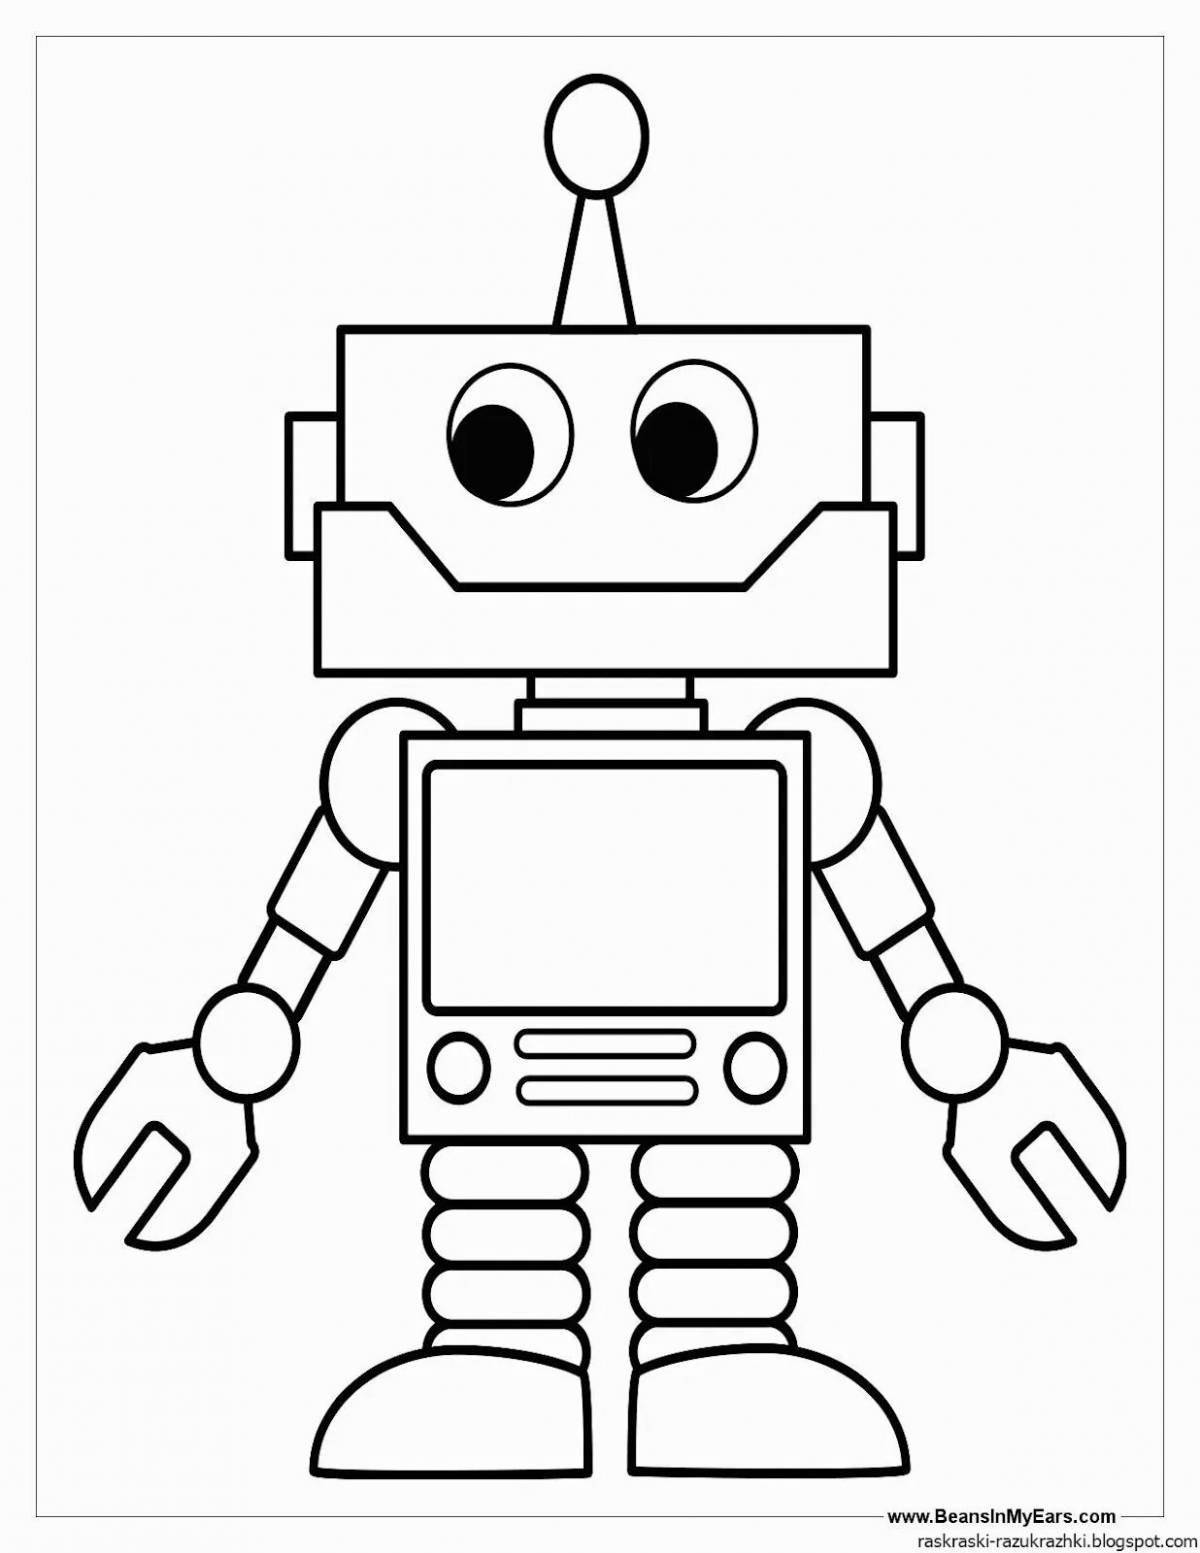 Amazing robot coloring page for boys